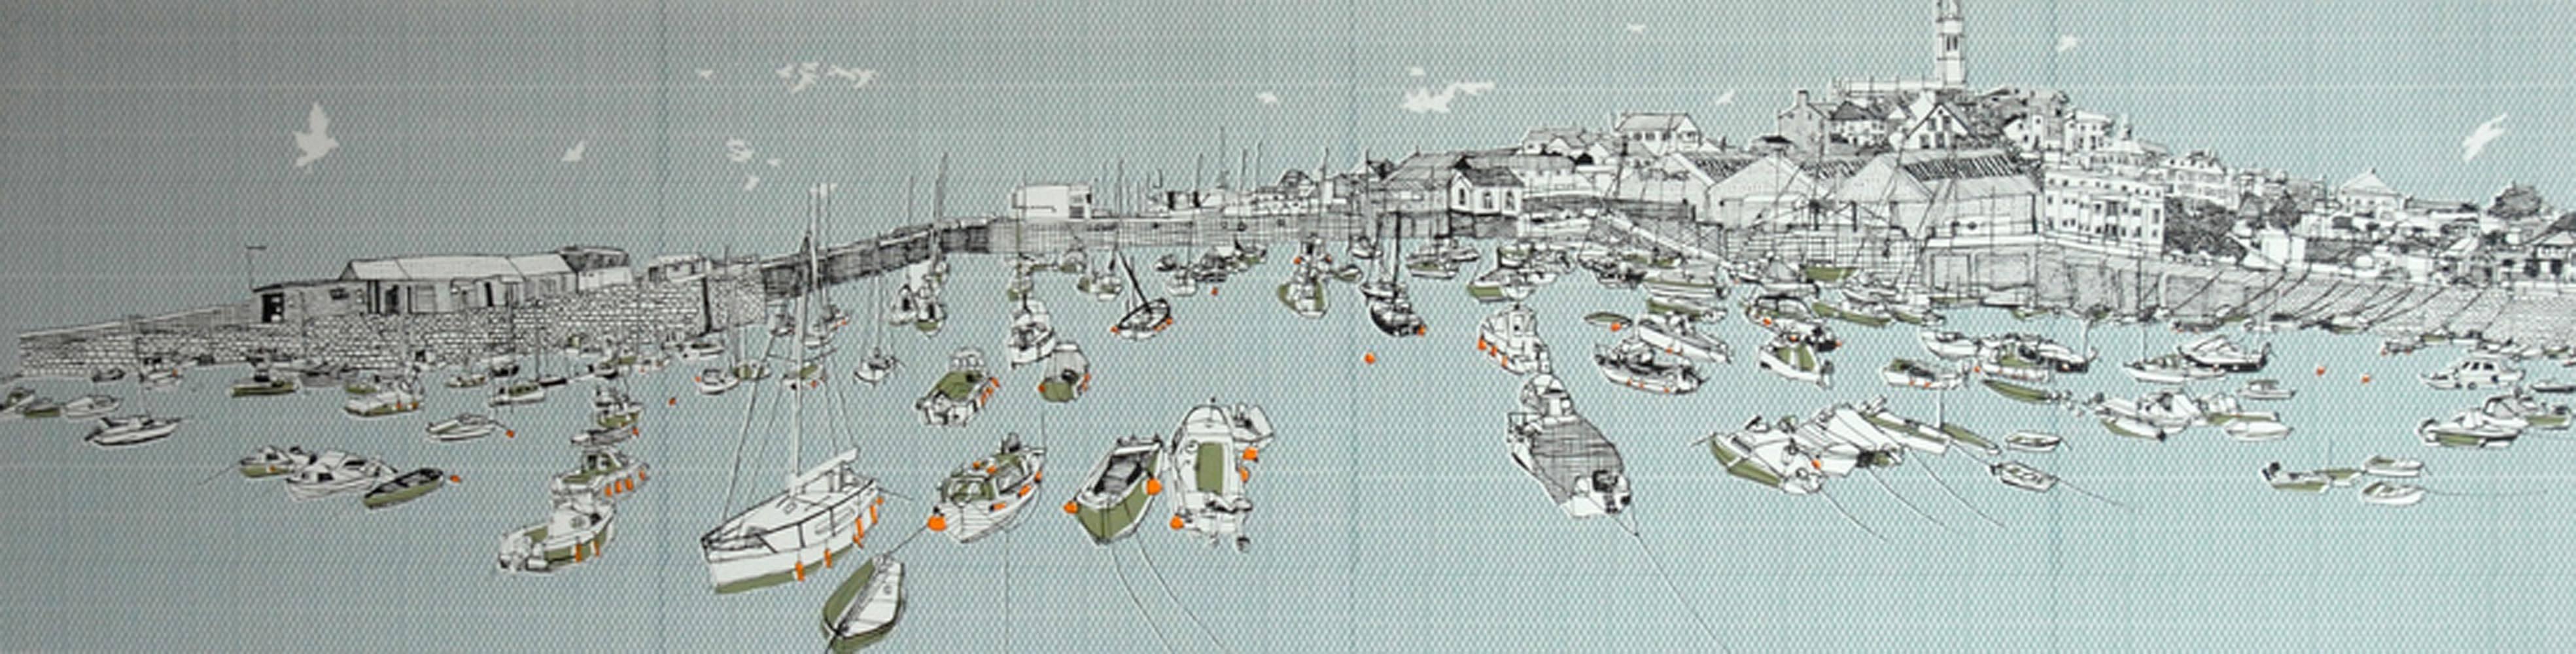 Clare Halifax
Penzance Harbour
Limited Edition Silkscreen Print
Edition of 75
Image Size: H 26cm x W 99cm 
Sheet Size: H 39cm x W 108cm 
Sold Unframed
Please note that insitu images are purely an indication of how a piece may look

Edition of Clare